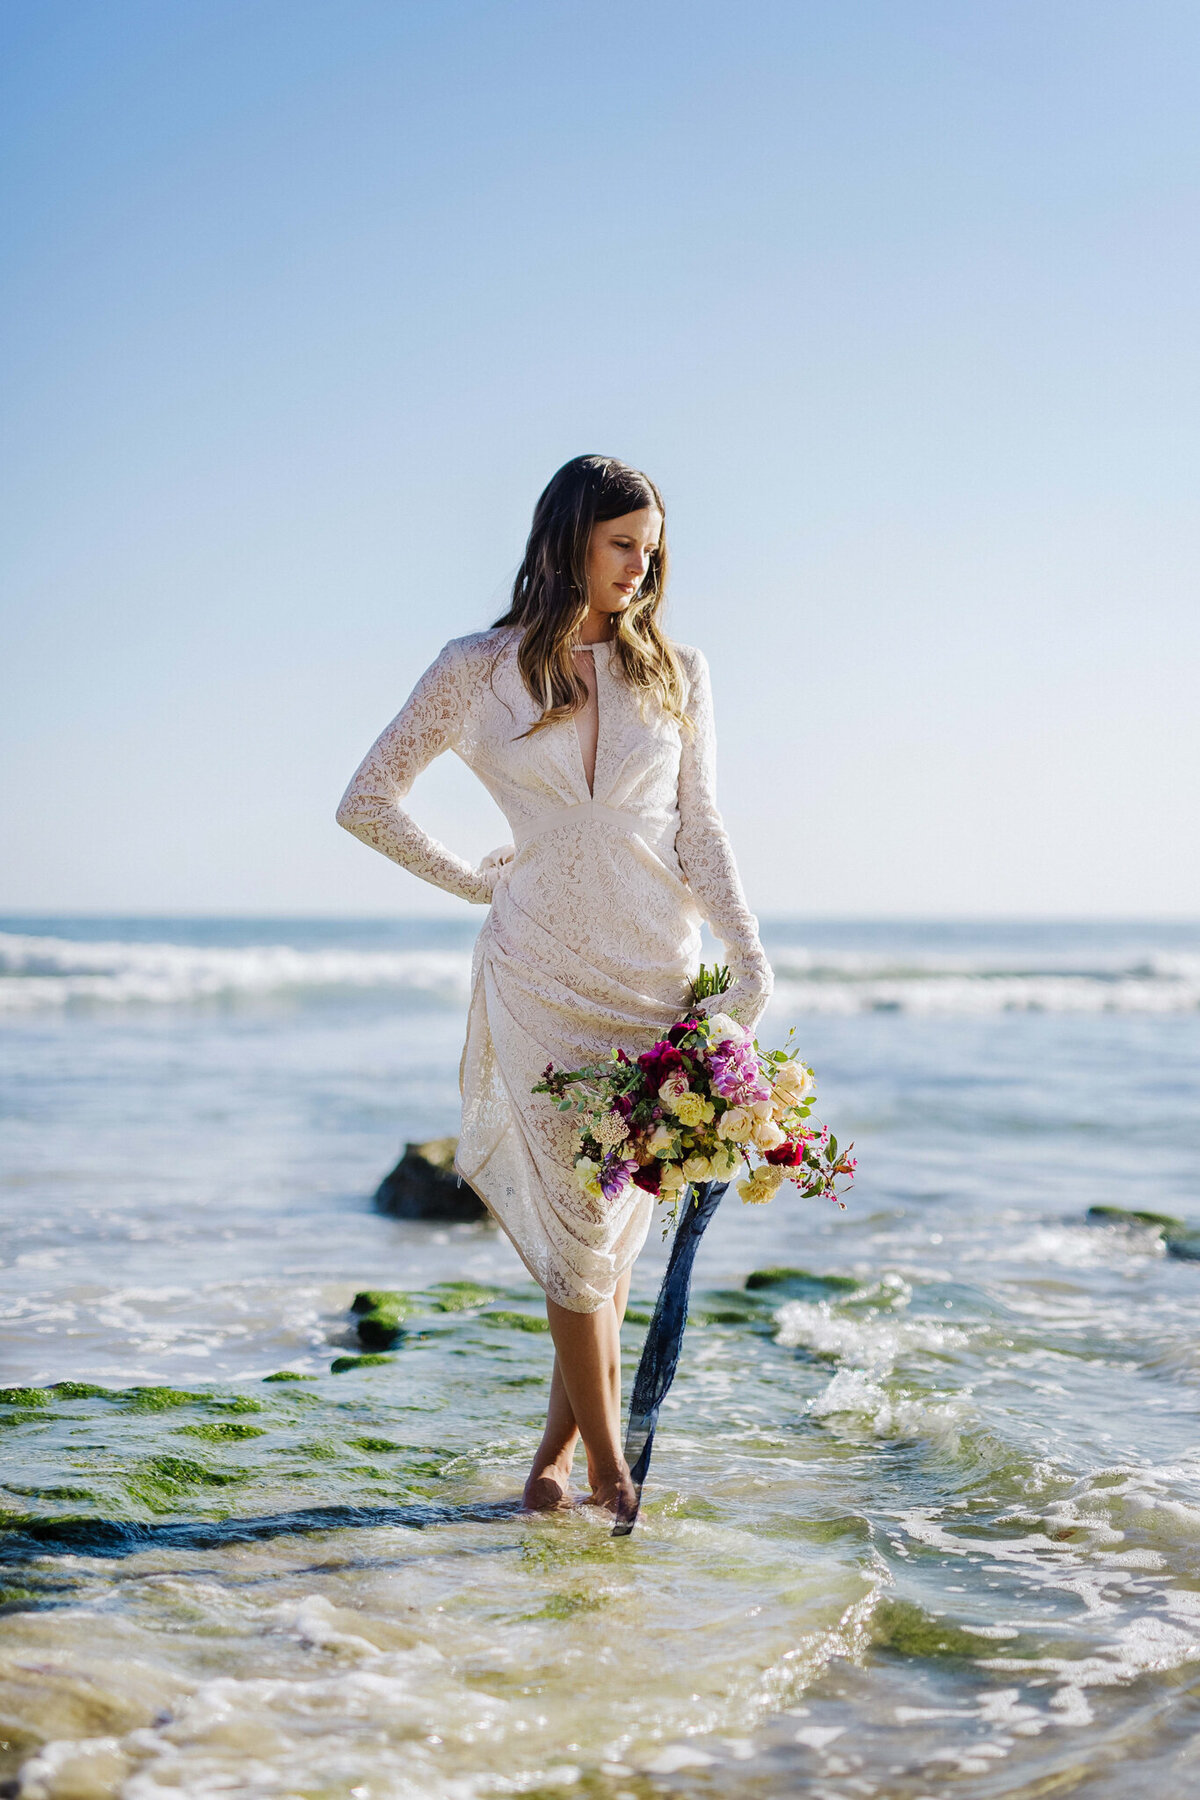 Local Calgary wedding inspiration, bride standing in water, wearing a vintage long-sleeved lace gown, holding a beautiful bouquet of yellow and purple flowers held together with a blue satin ribbon, captured by Christy D. Swanberg Photography, editorial elopement and wedding photographer in Calgary, Alberta, featured on the Bronte Bride Vendor Guide.